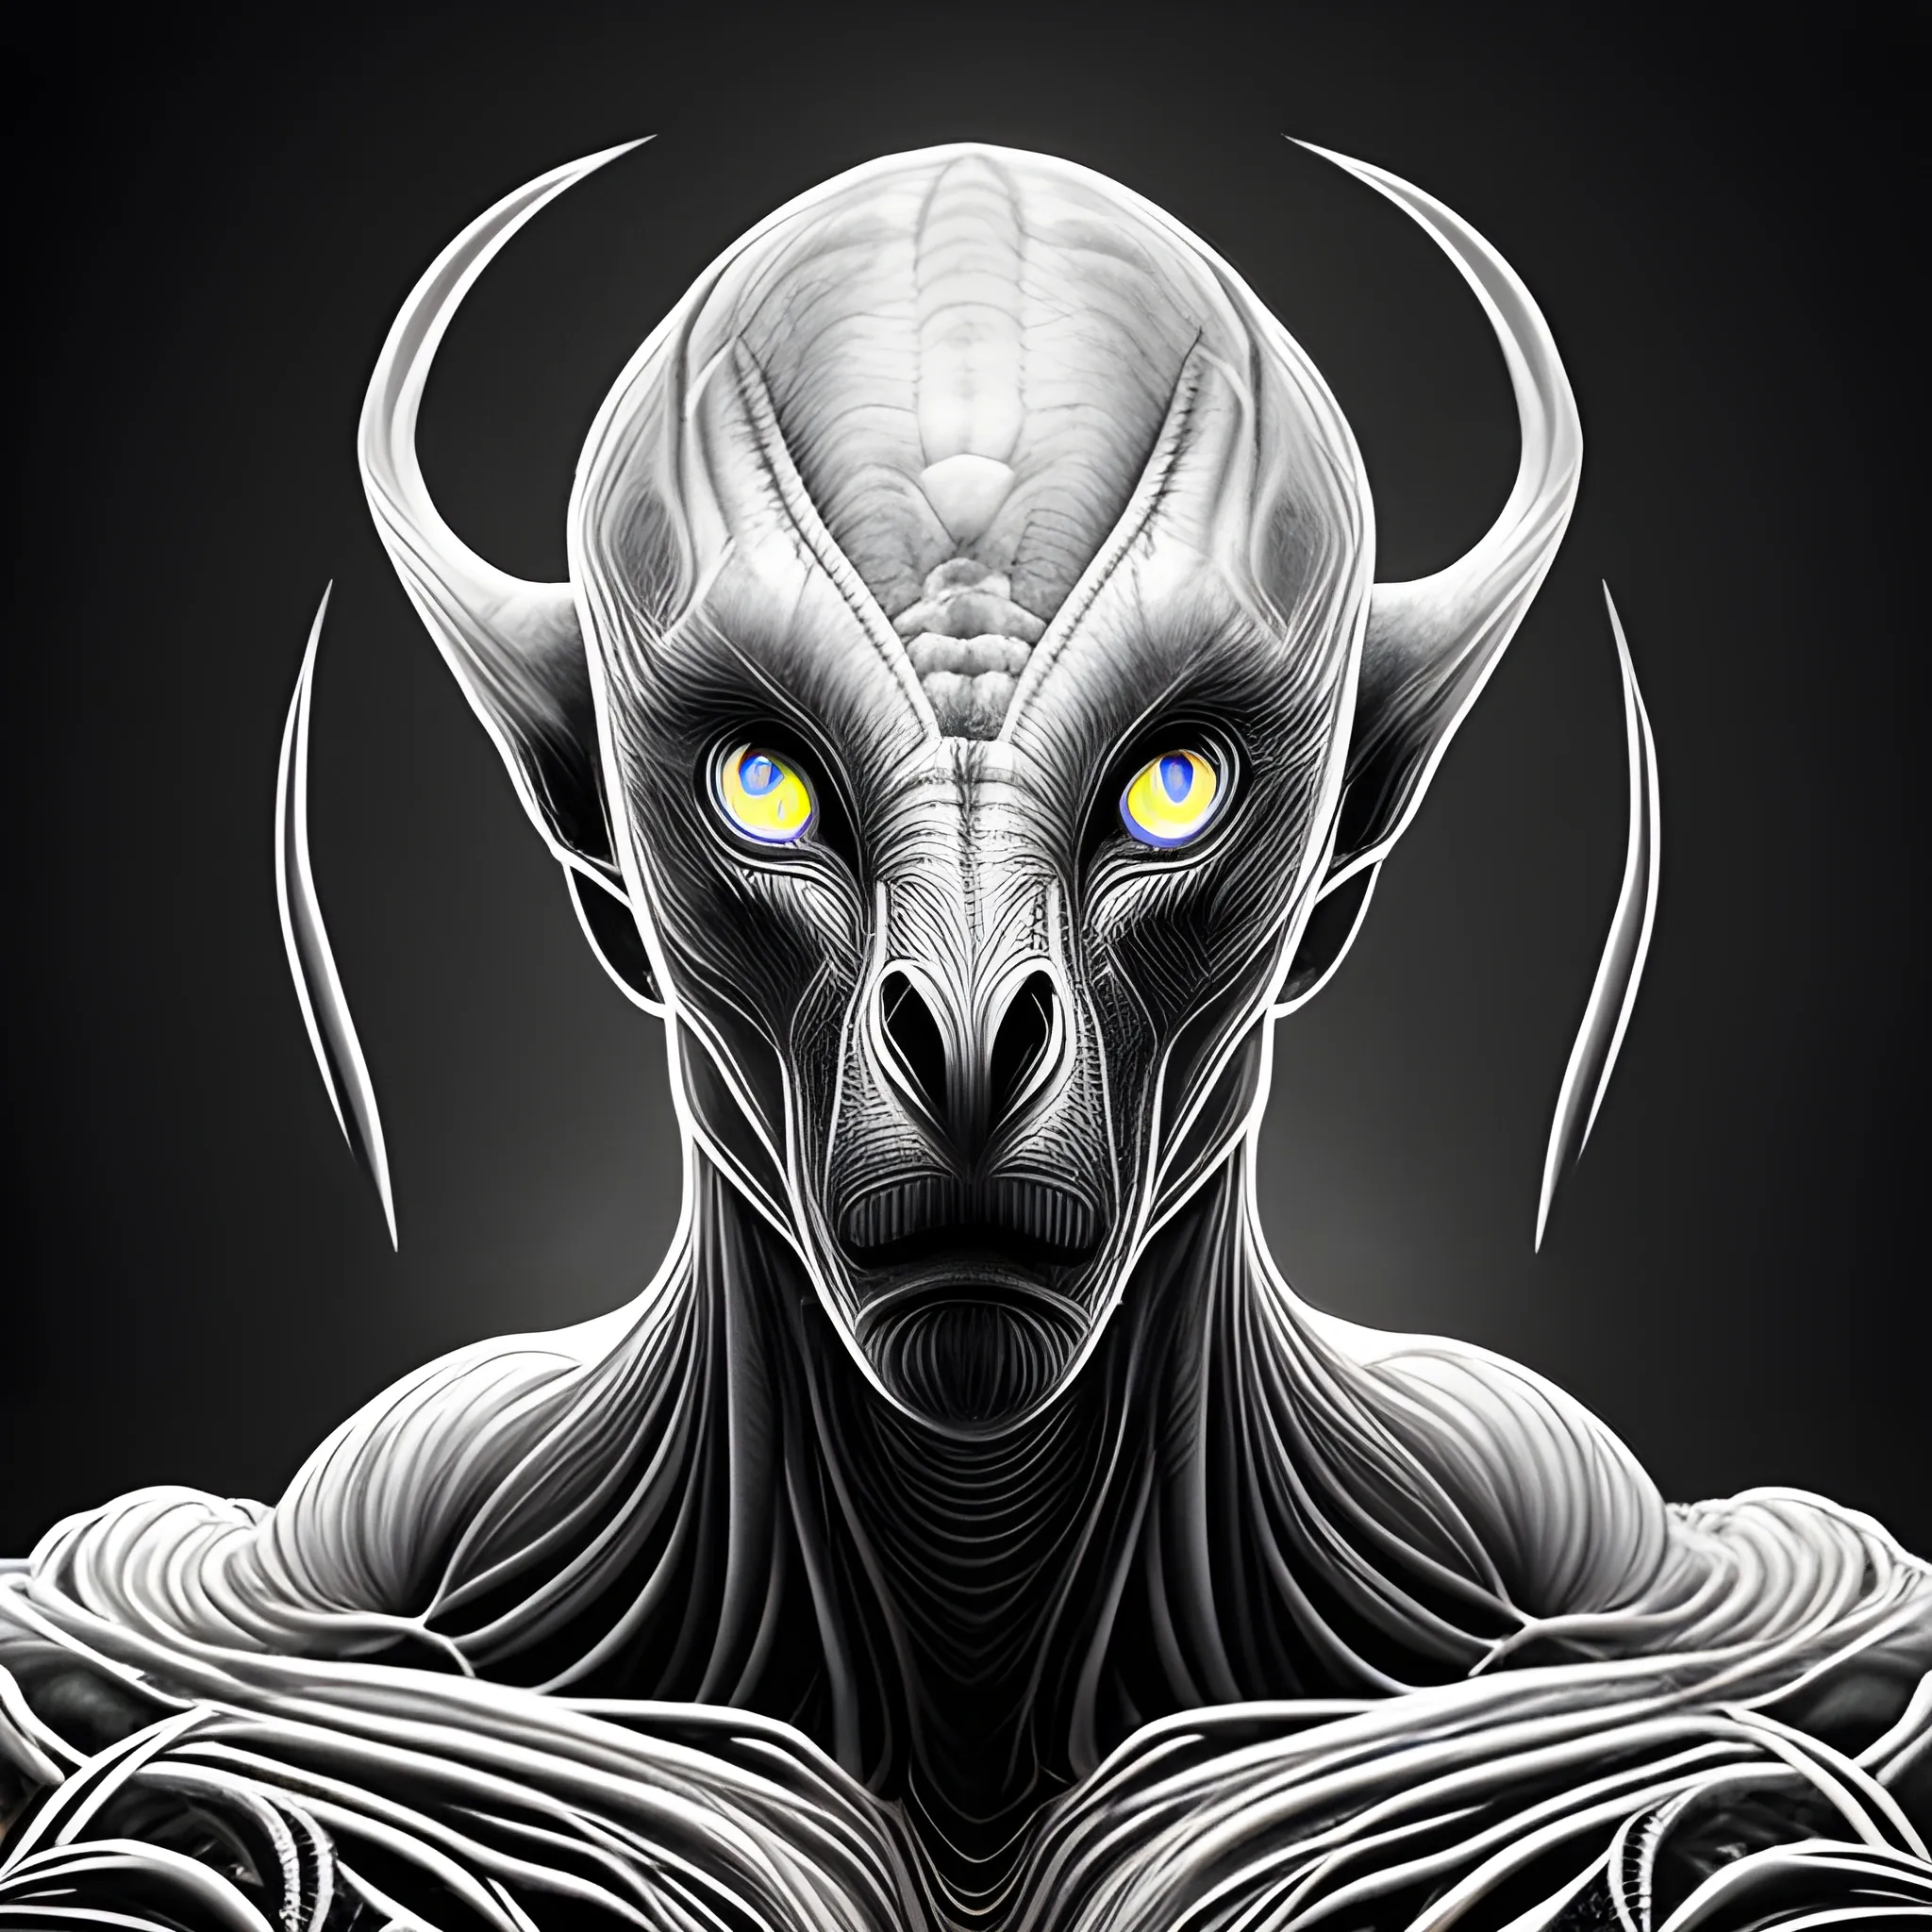 A detailed and intricate digital art piece in a cinematic style, this ultra high resolution portrait of a powerful, veiny alien beast is a true masterpiece, Pencil Sketch